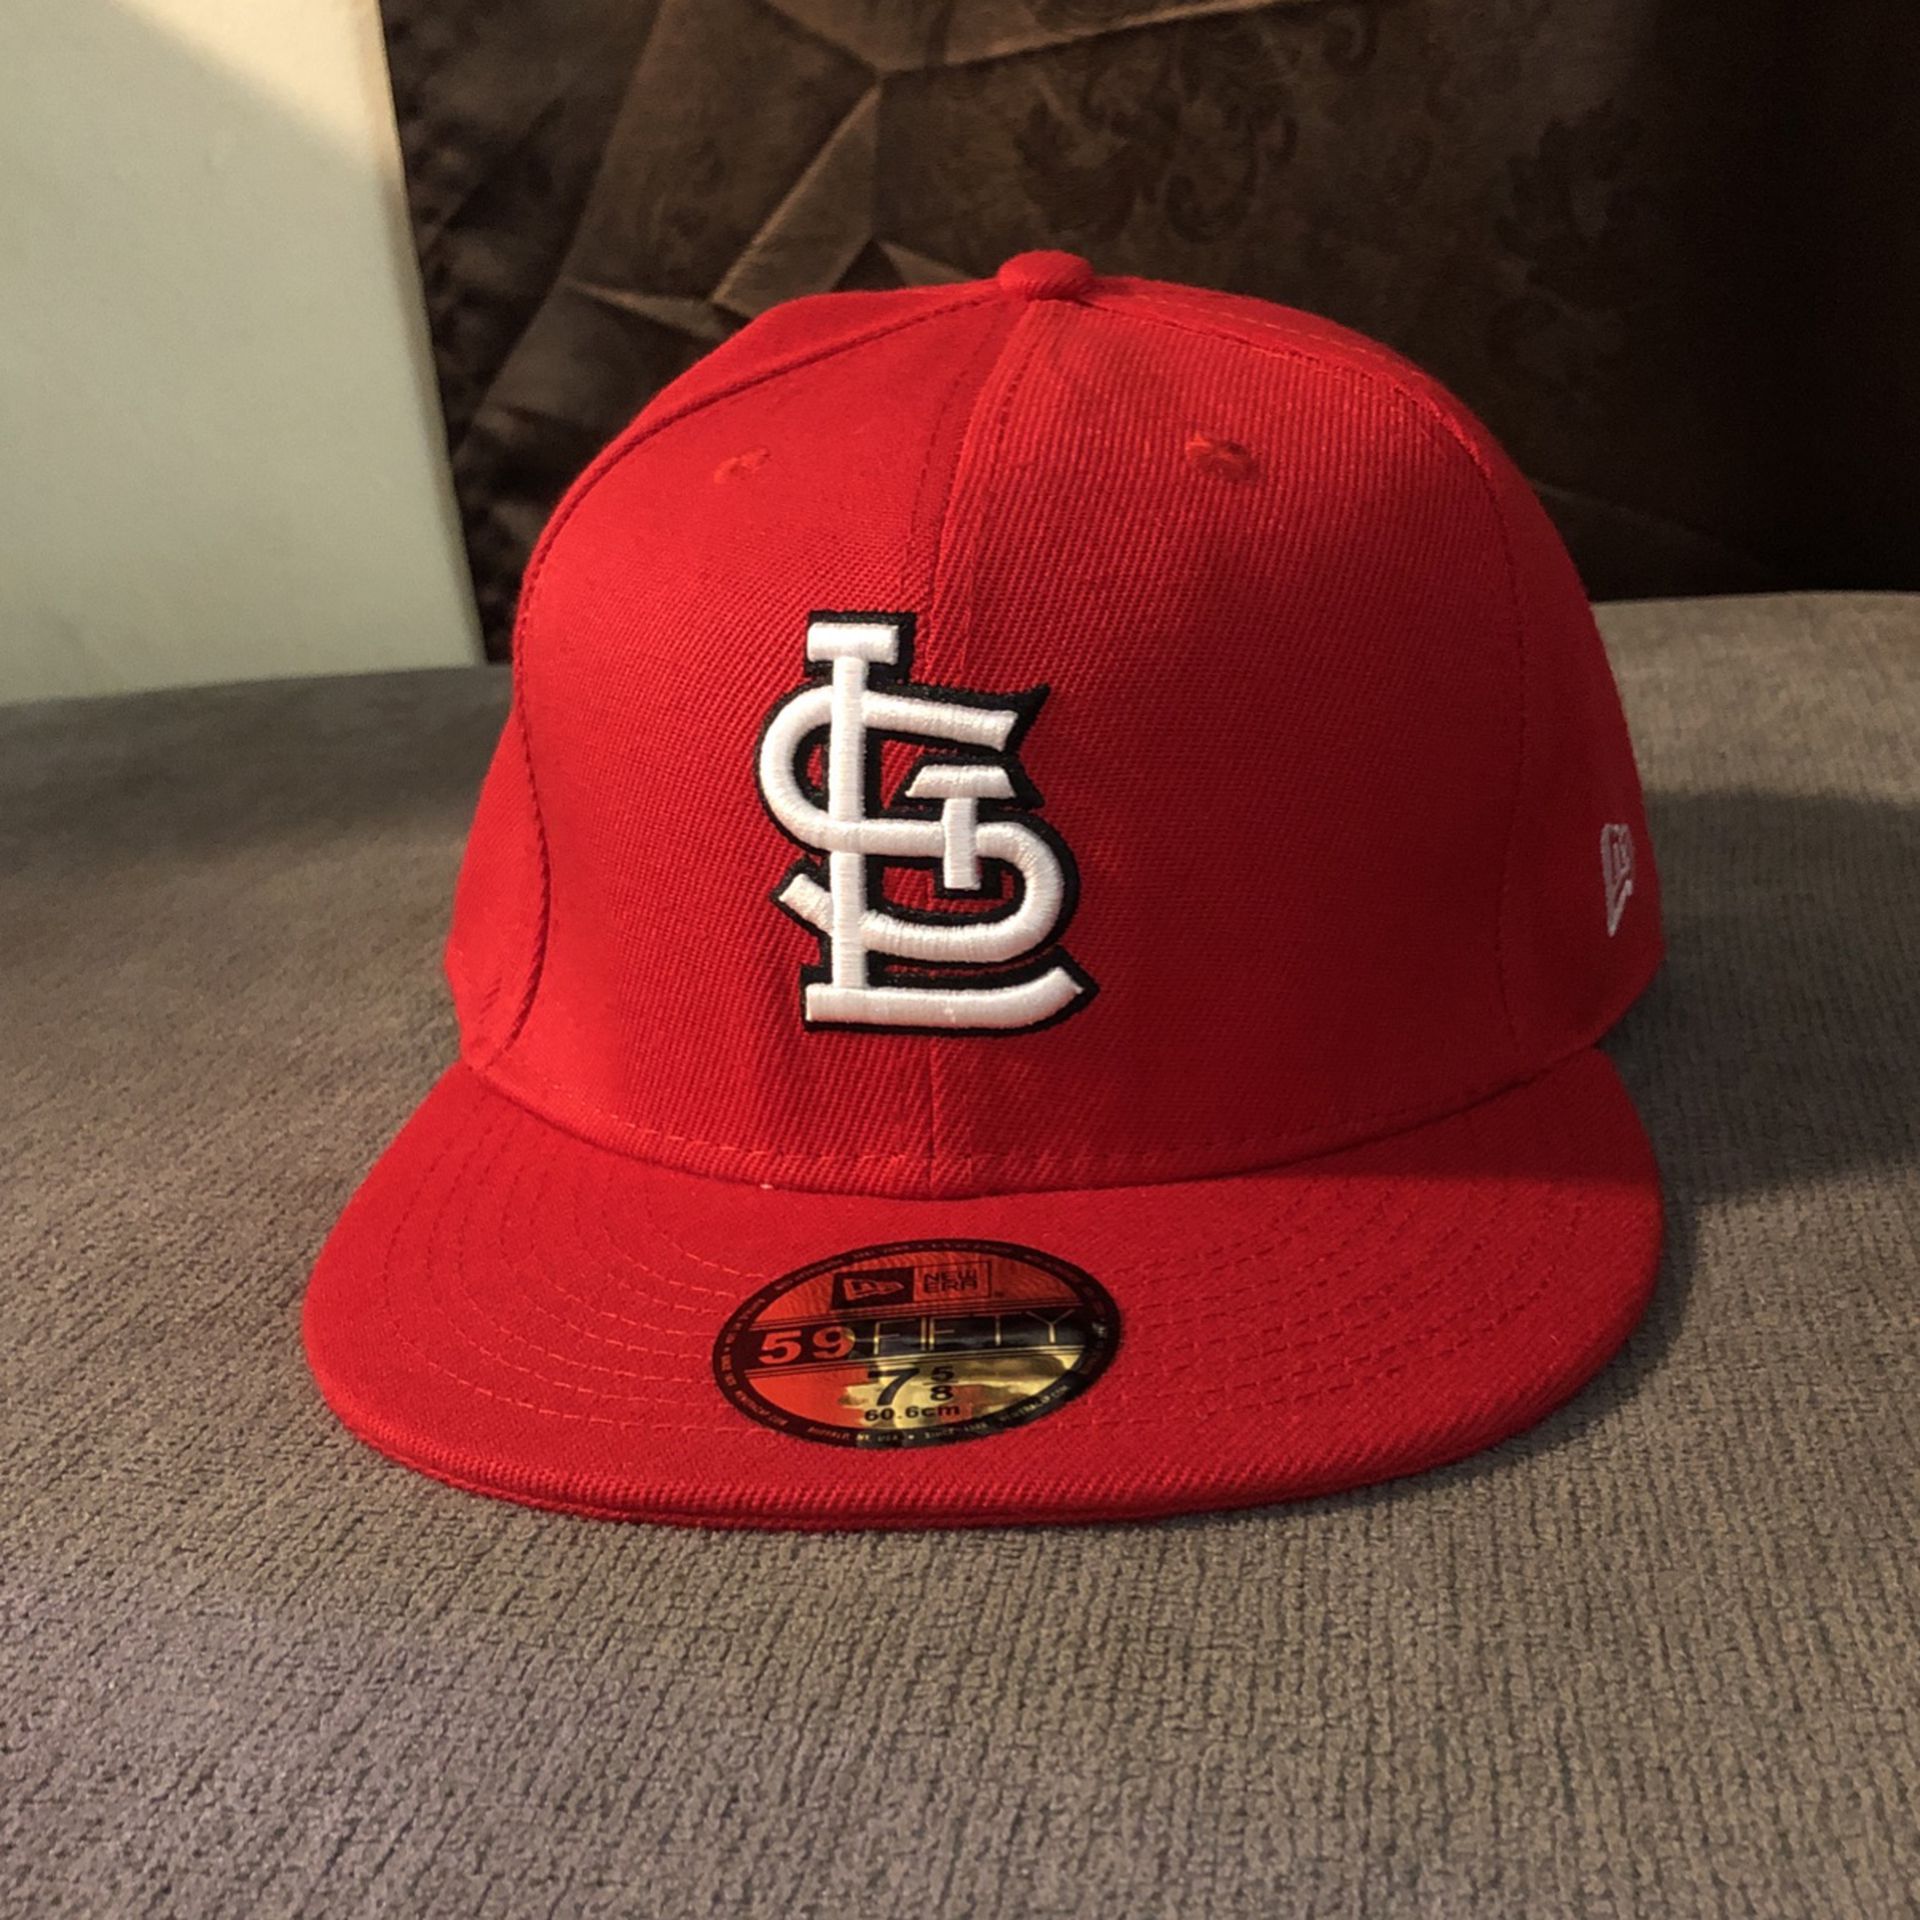 St. Louis Red Fitted Hat 7 5/8